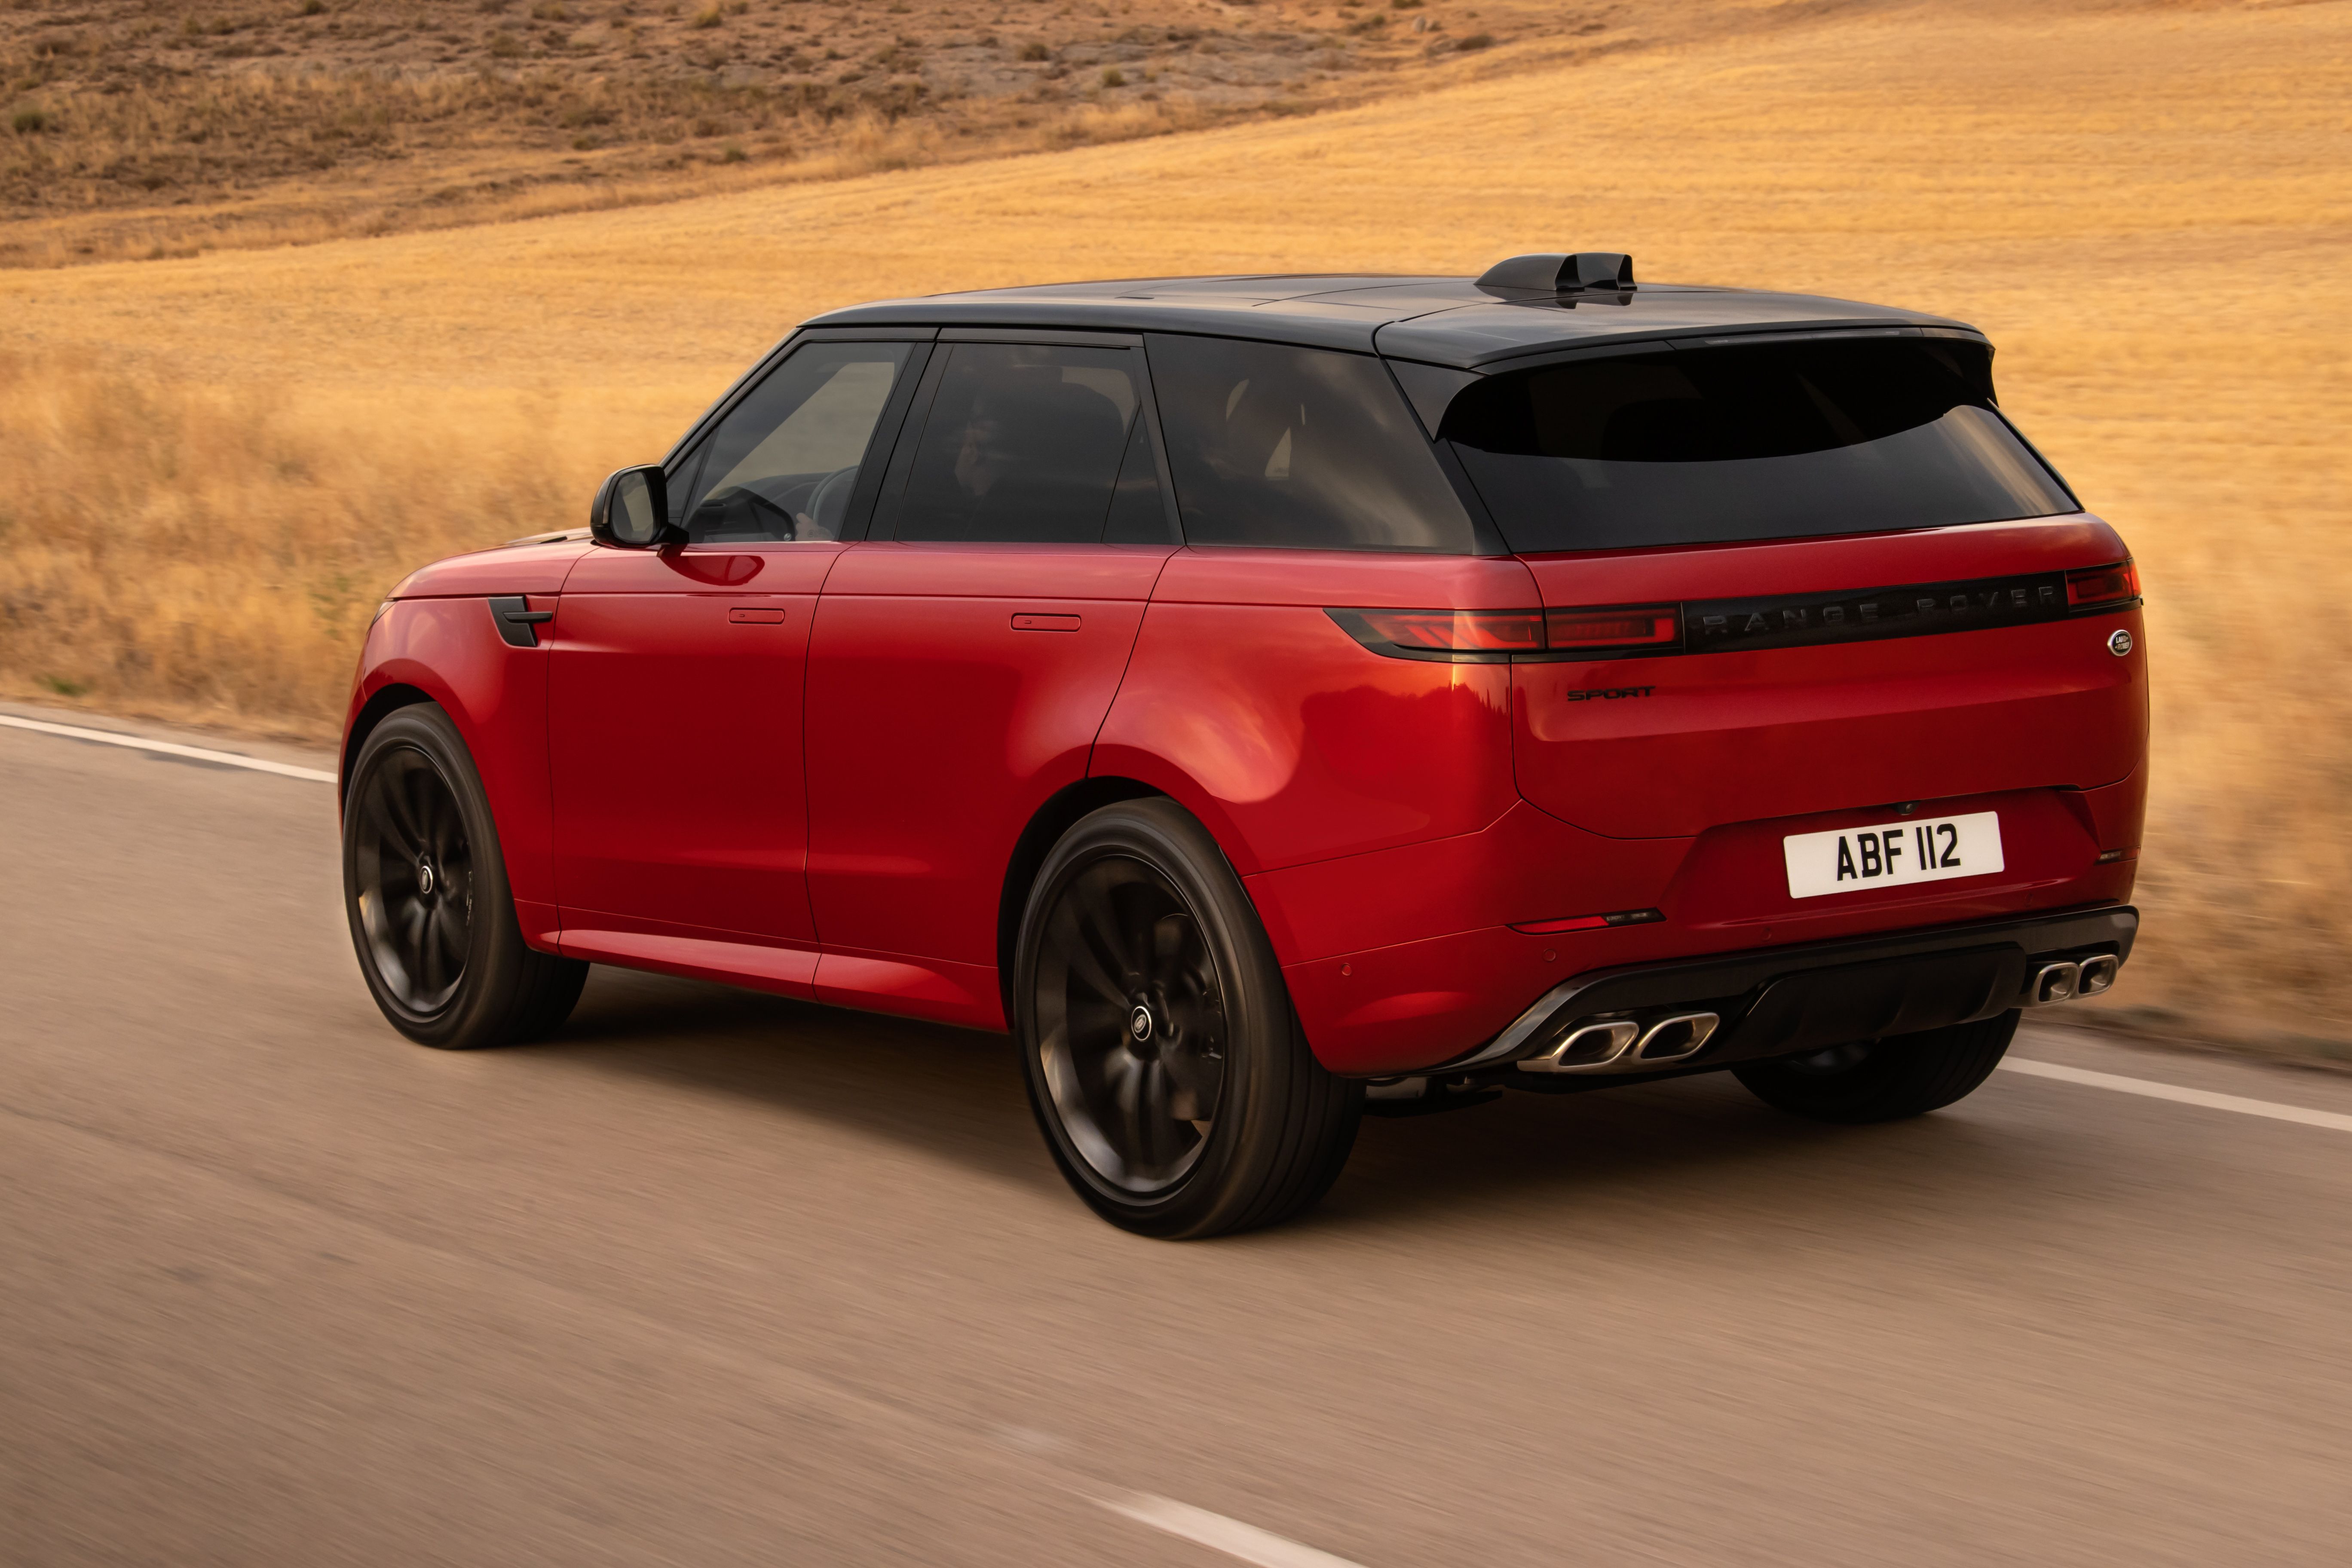 The 2023 Land rover Range rover sport FIRST EDITION